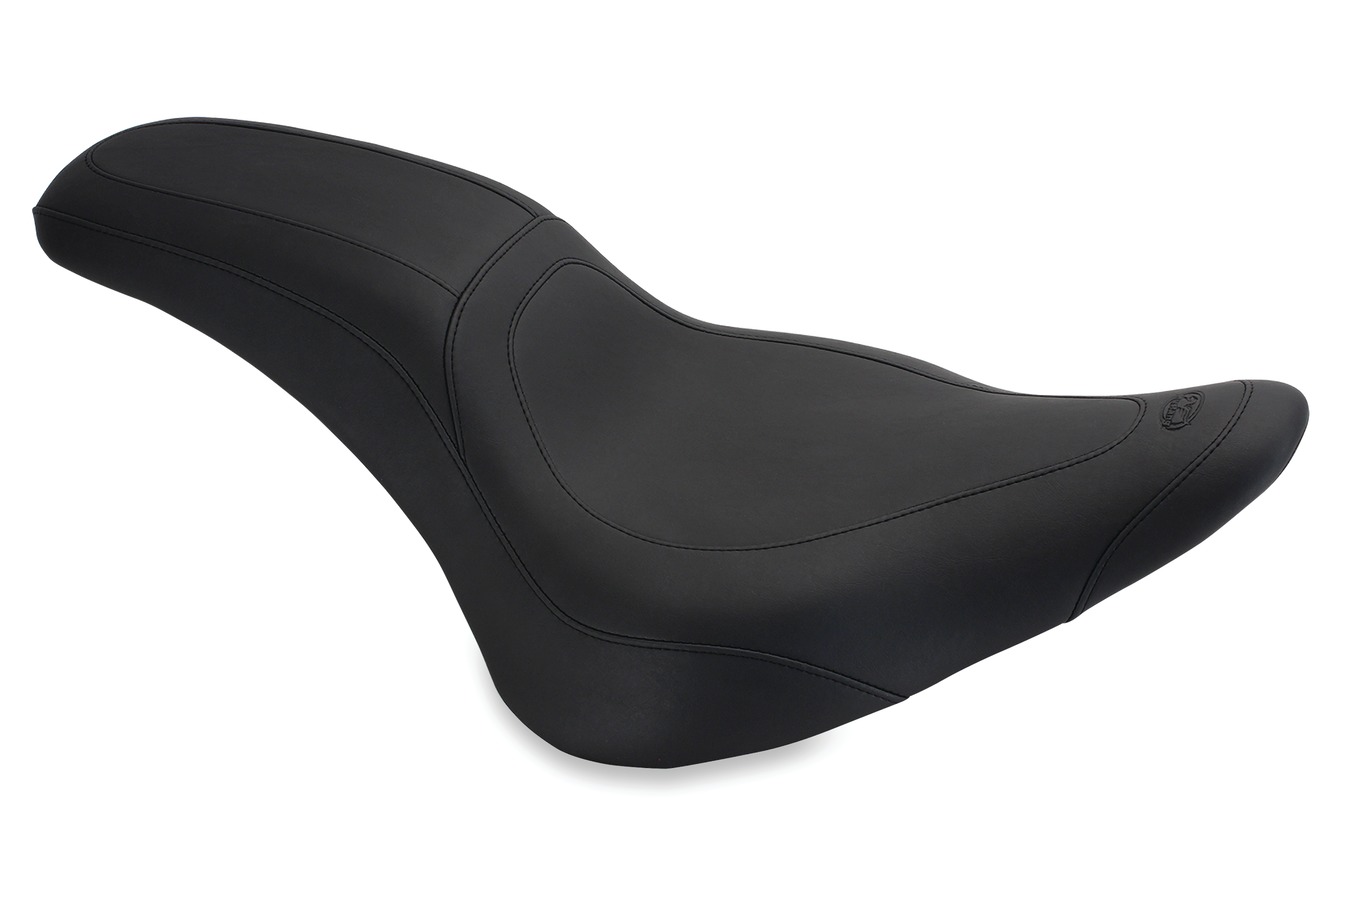 Tripper Fastback™ One-Piece Seat for Harley-Davidson Softail Breakout 2013-